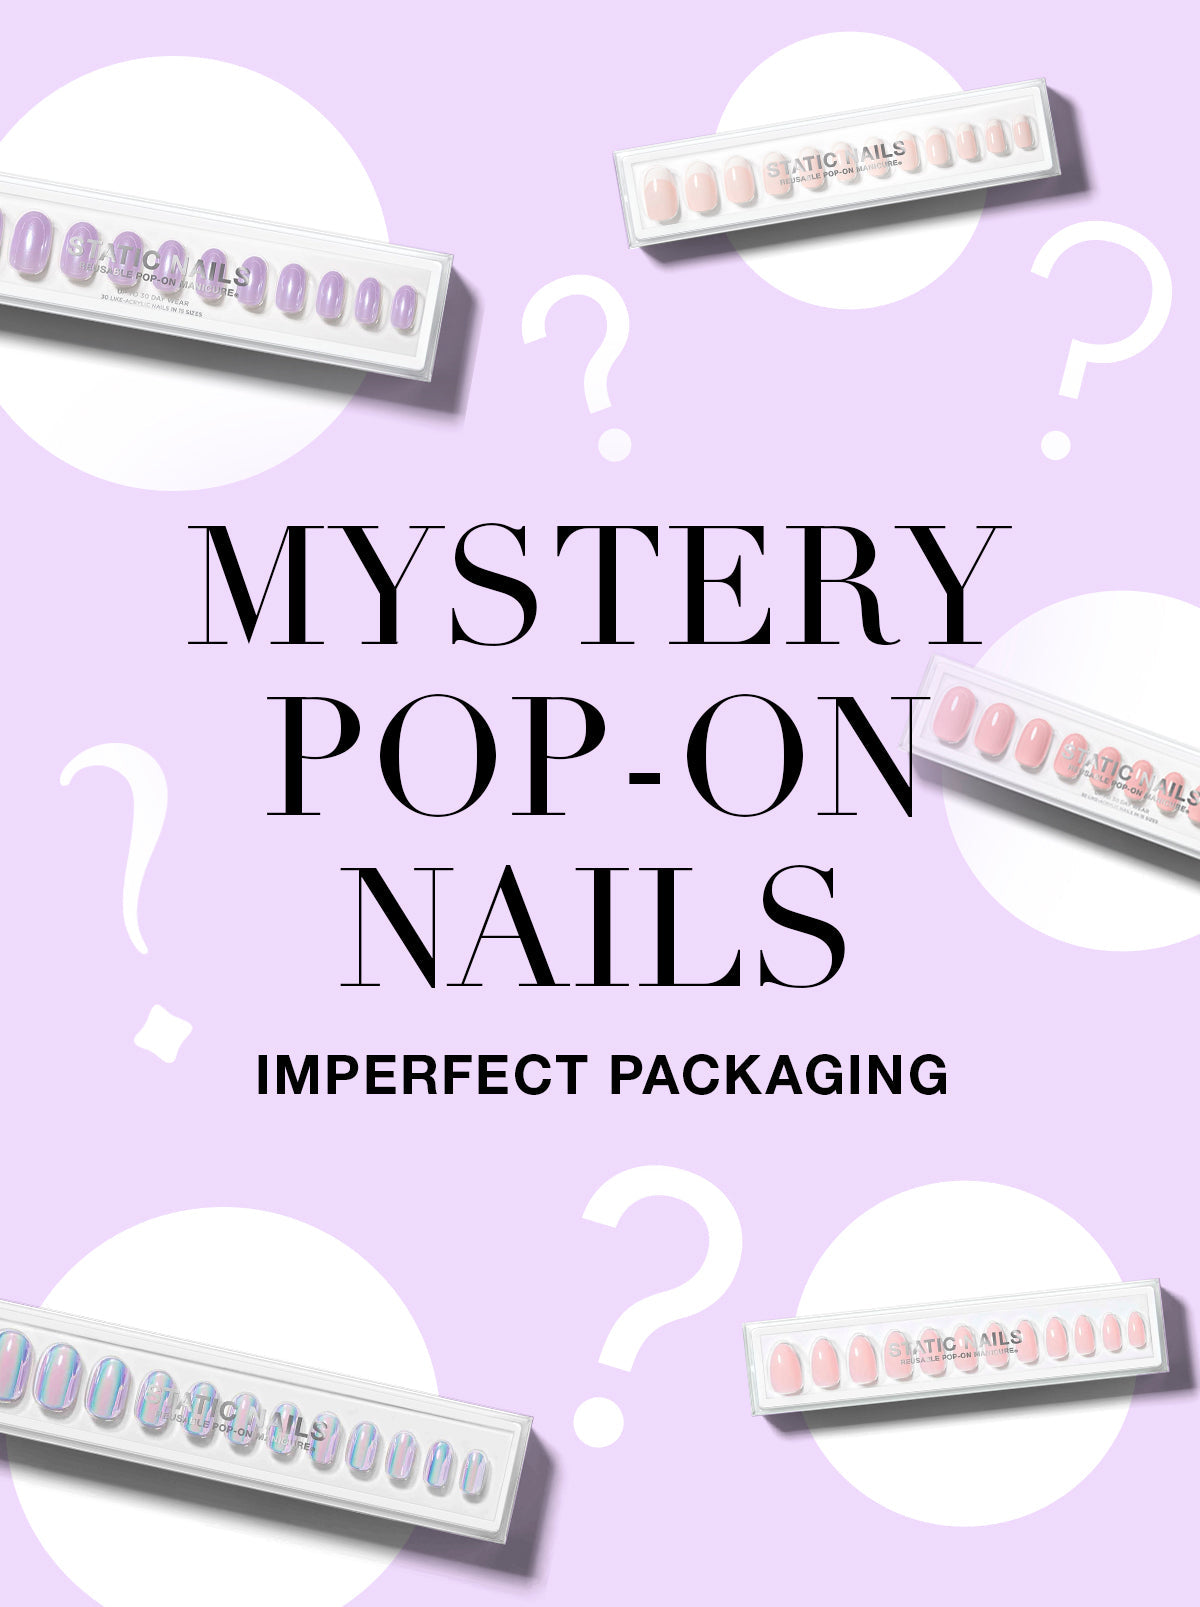 Mystery pop-on nanils imperfect packaging